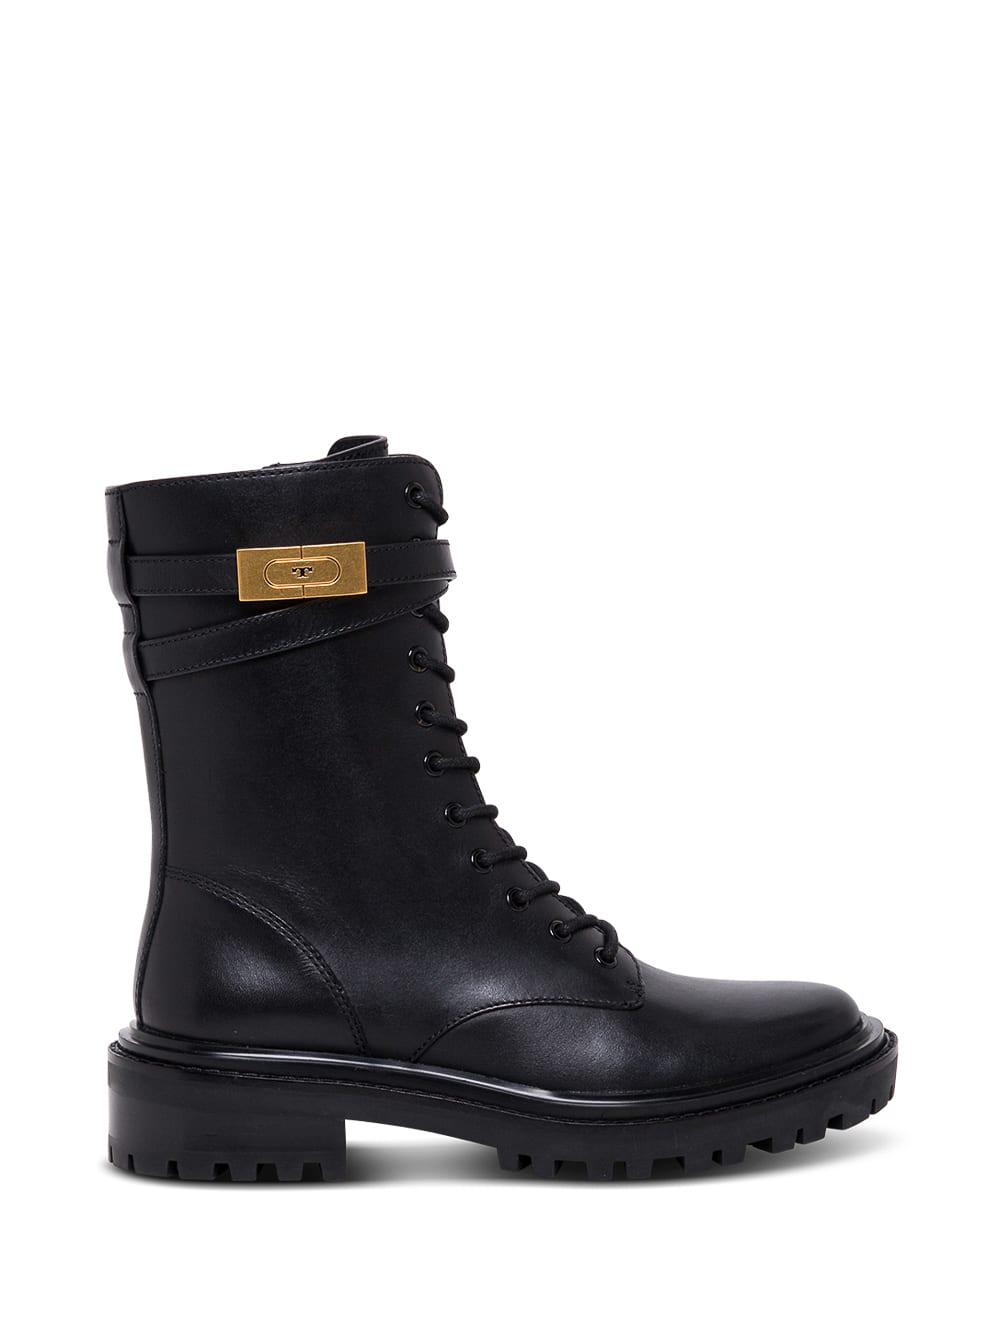 Tory Burch T Hardware Black Leather Ankle Boots With Logo